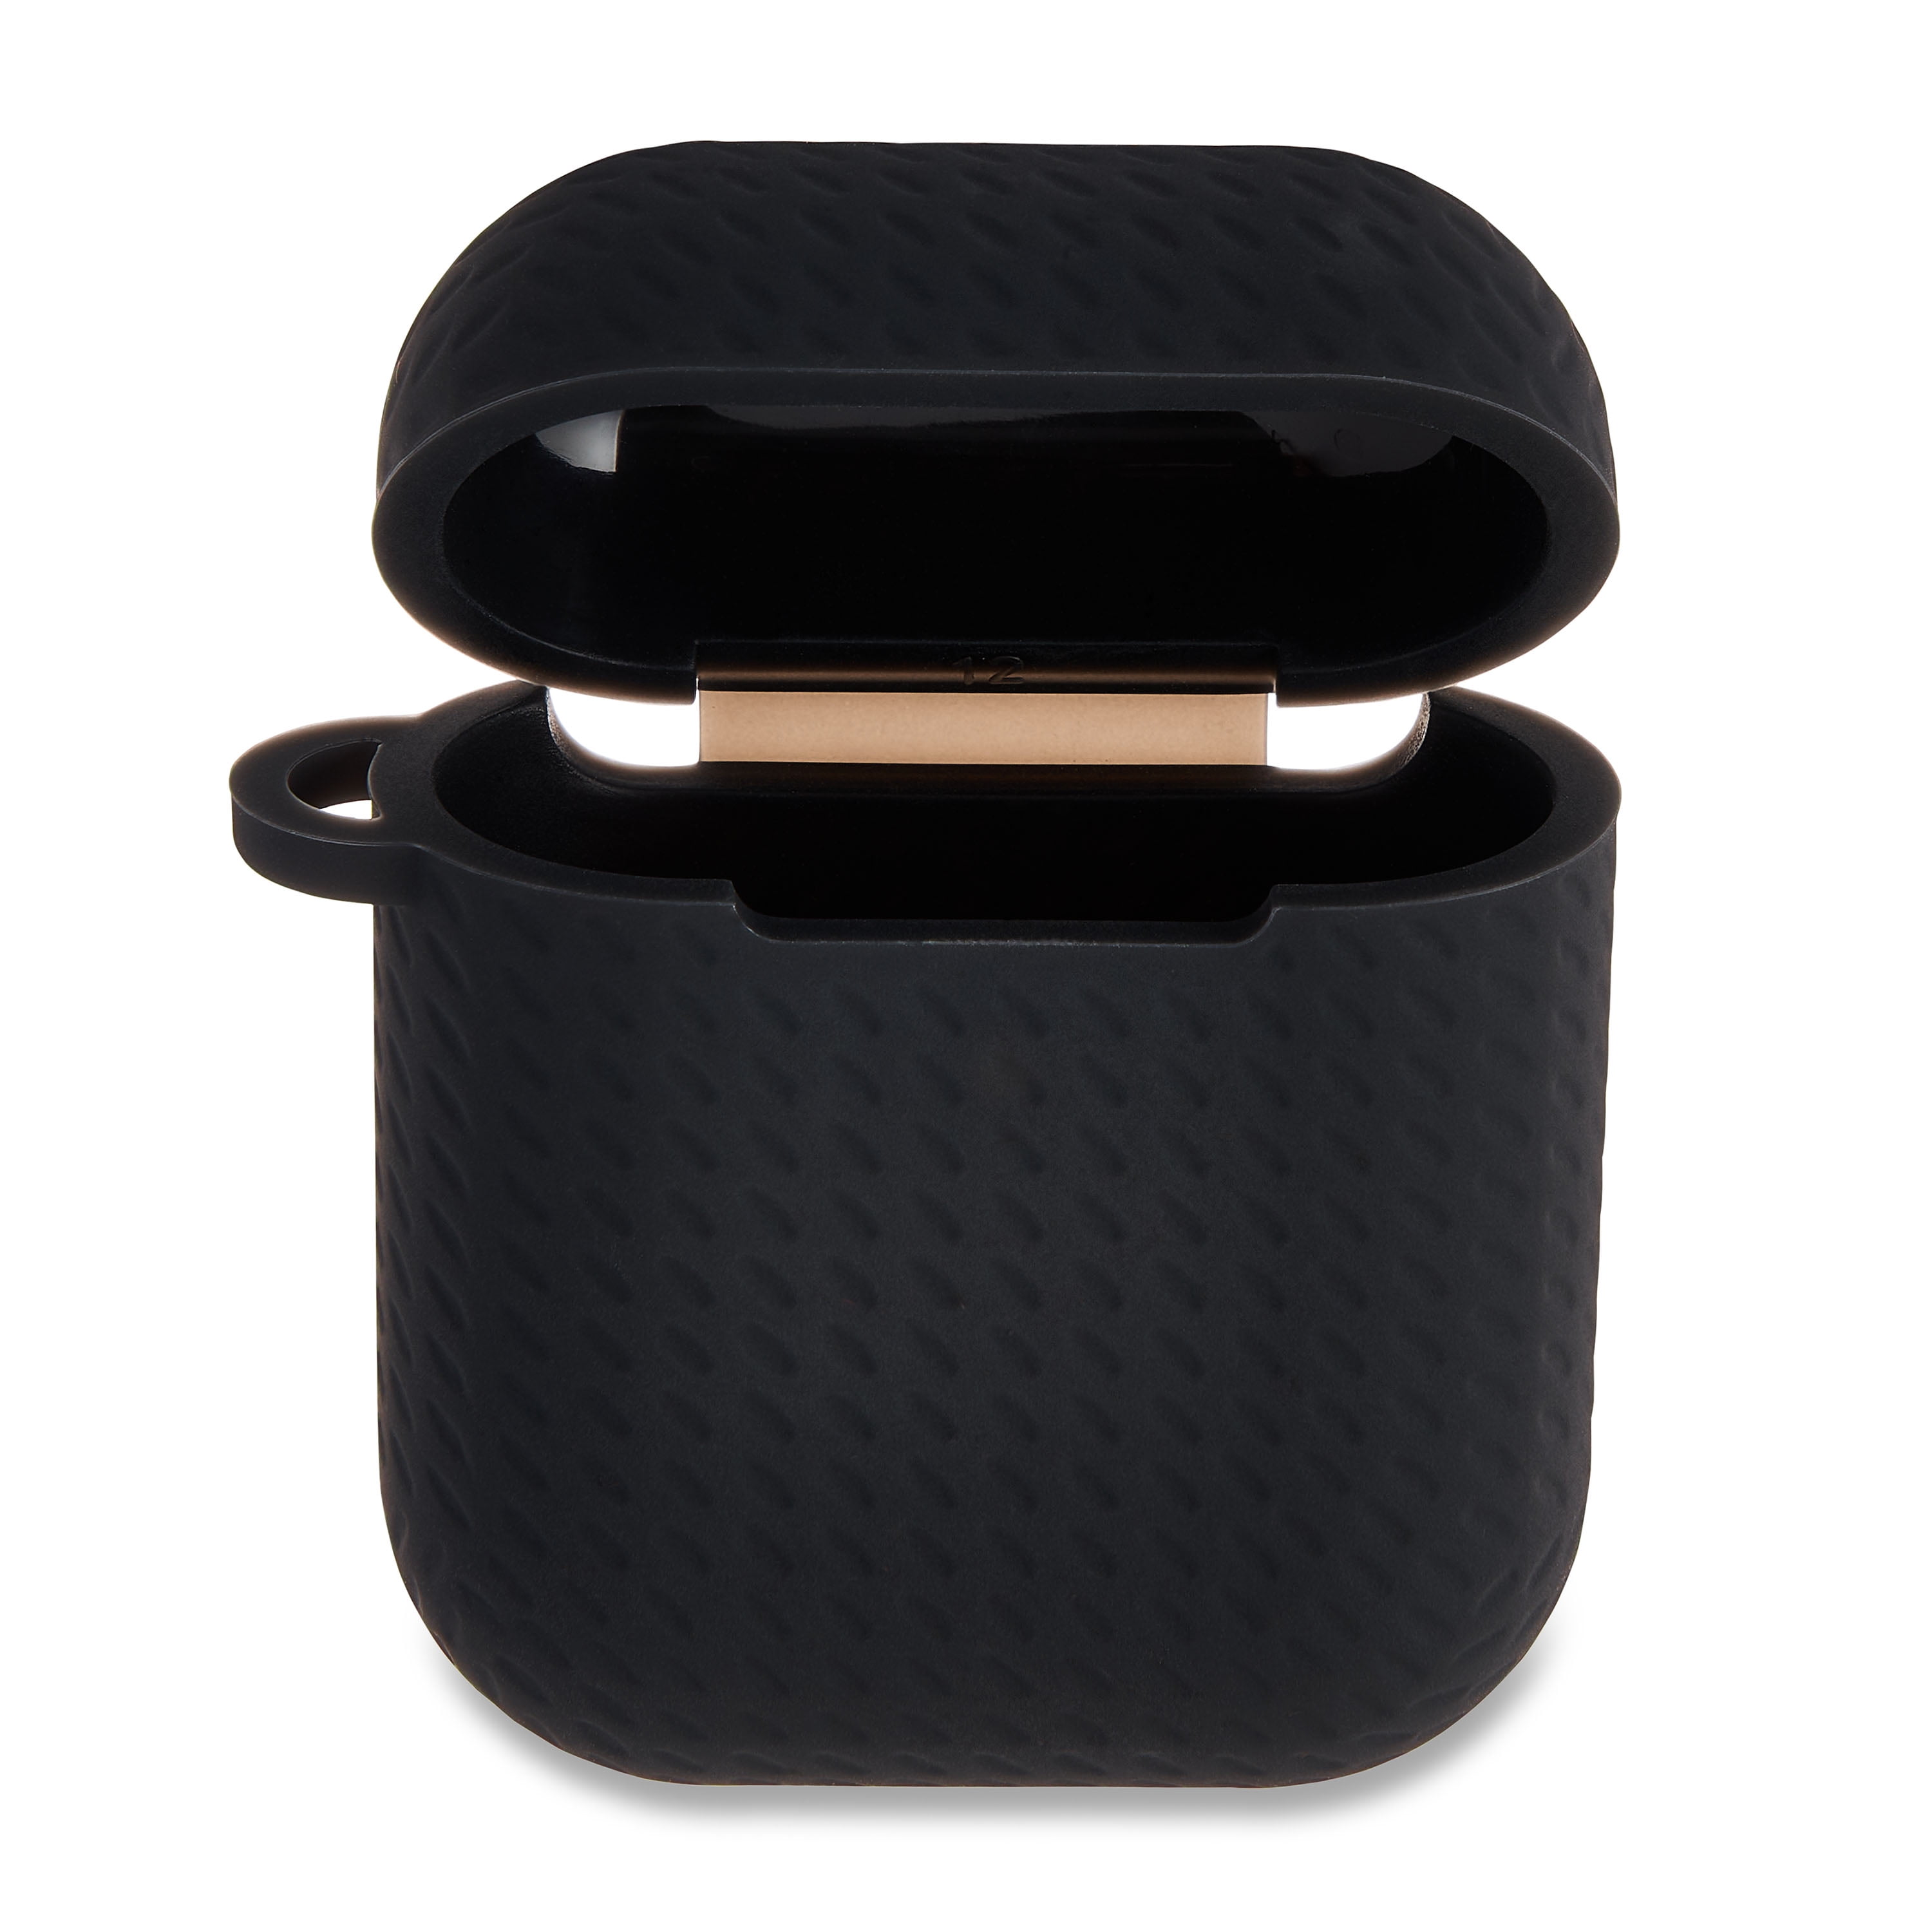 onn. Charging Case Cover for Apple AirPods (1st and 2nd generation), Textured Black